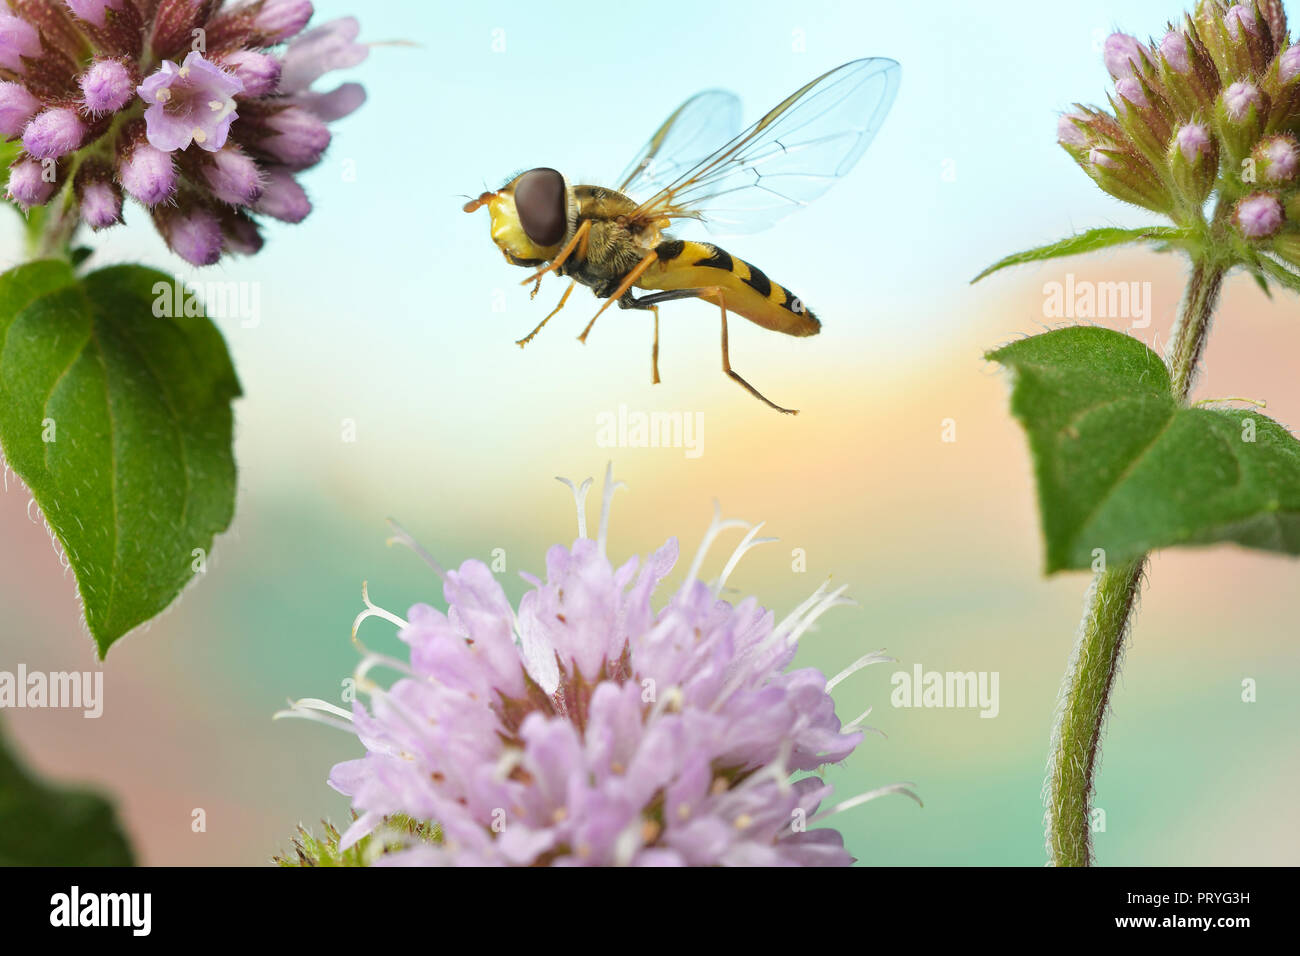 Syrphus vitripennis (Syrphus vitripennis), in flight on the bloom of a Water mint (Mentha aquatica), Germany Stock Photo